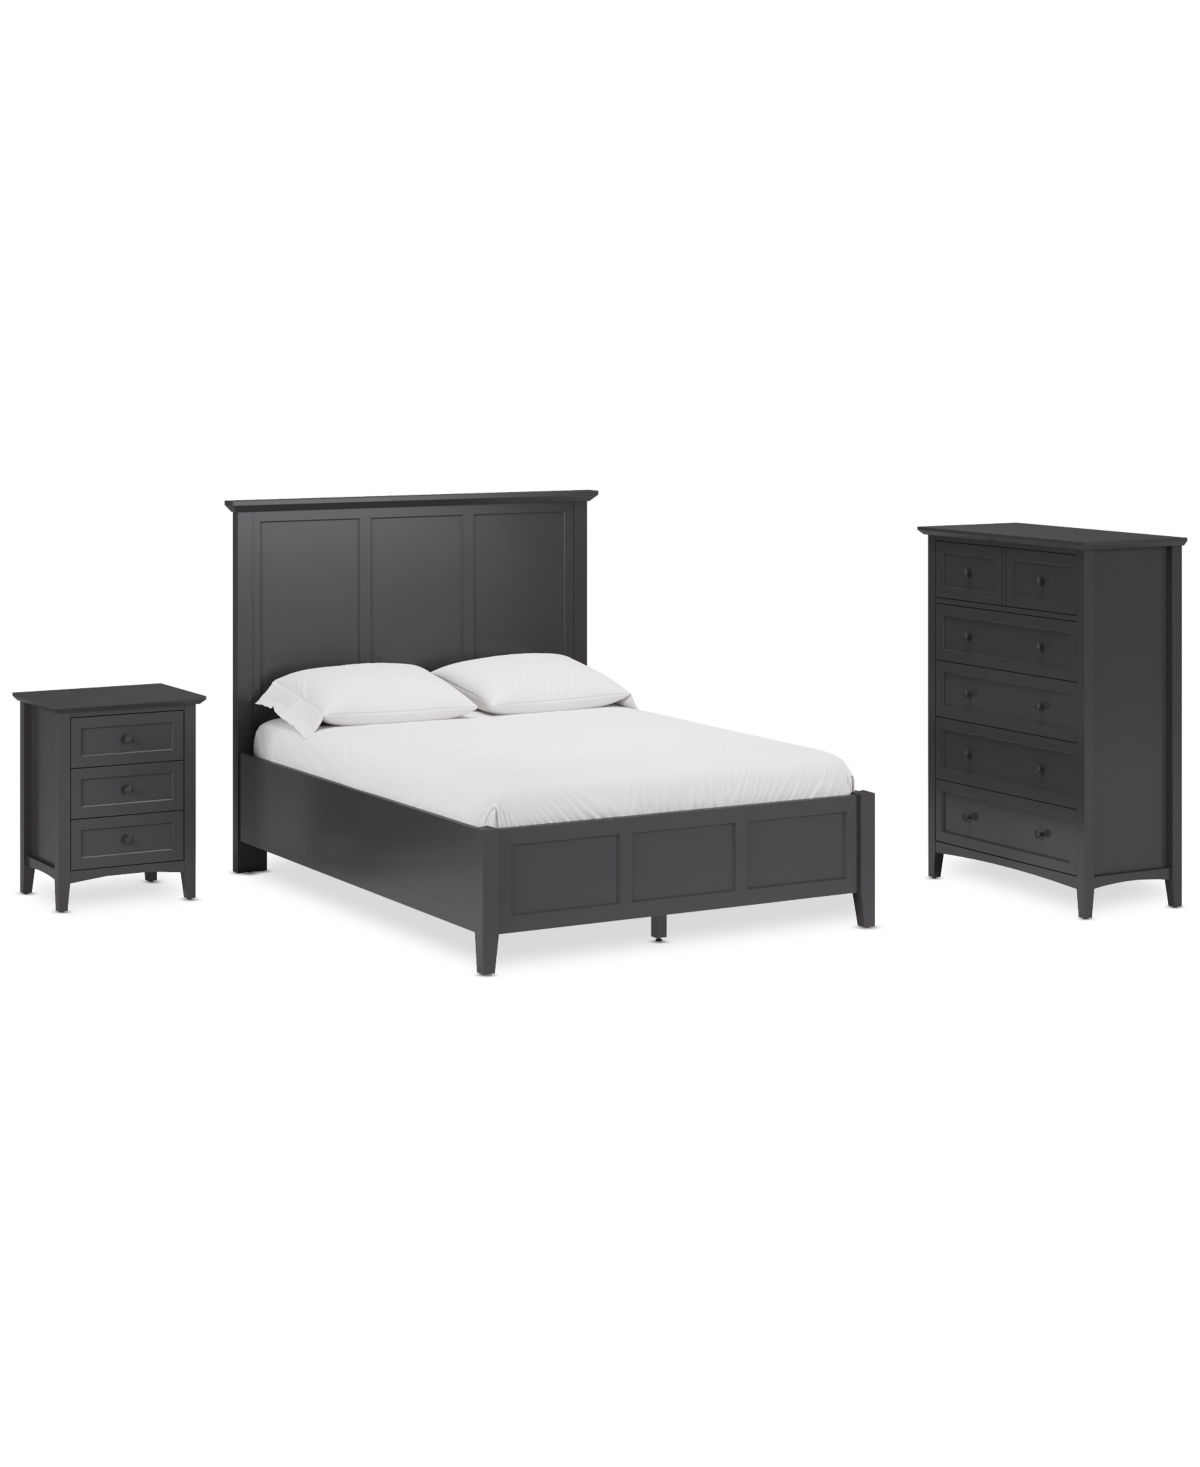 Furniture Hedworth King Bed 3pc (king Bed + Chest + Nightstand) In Black